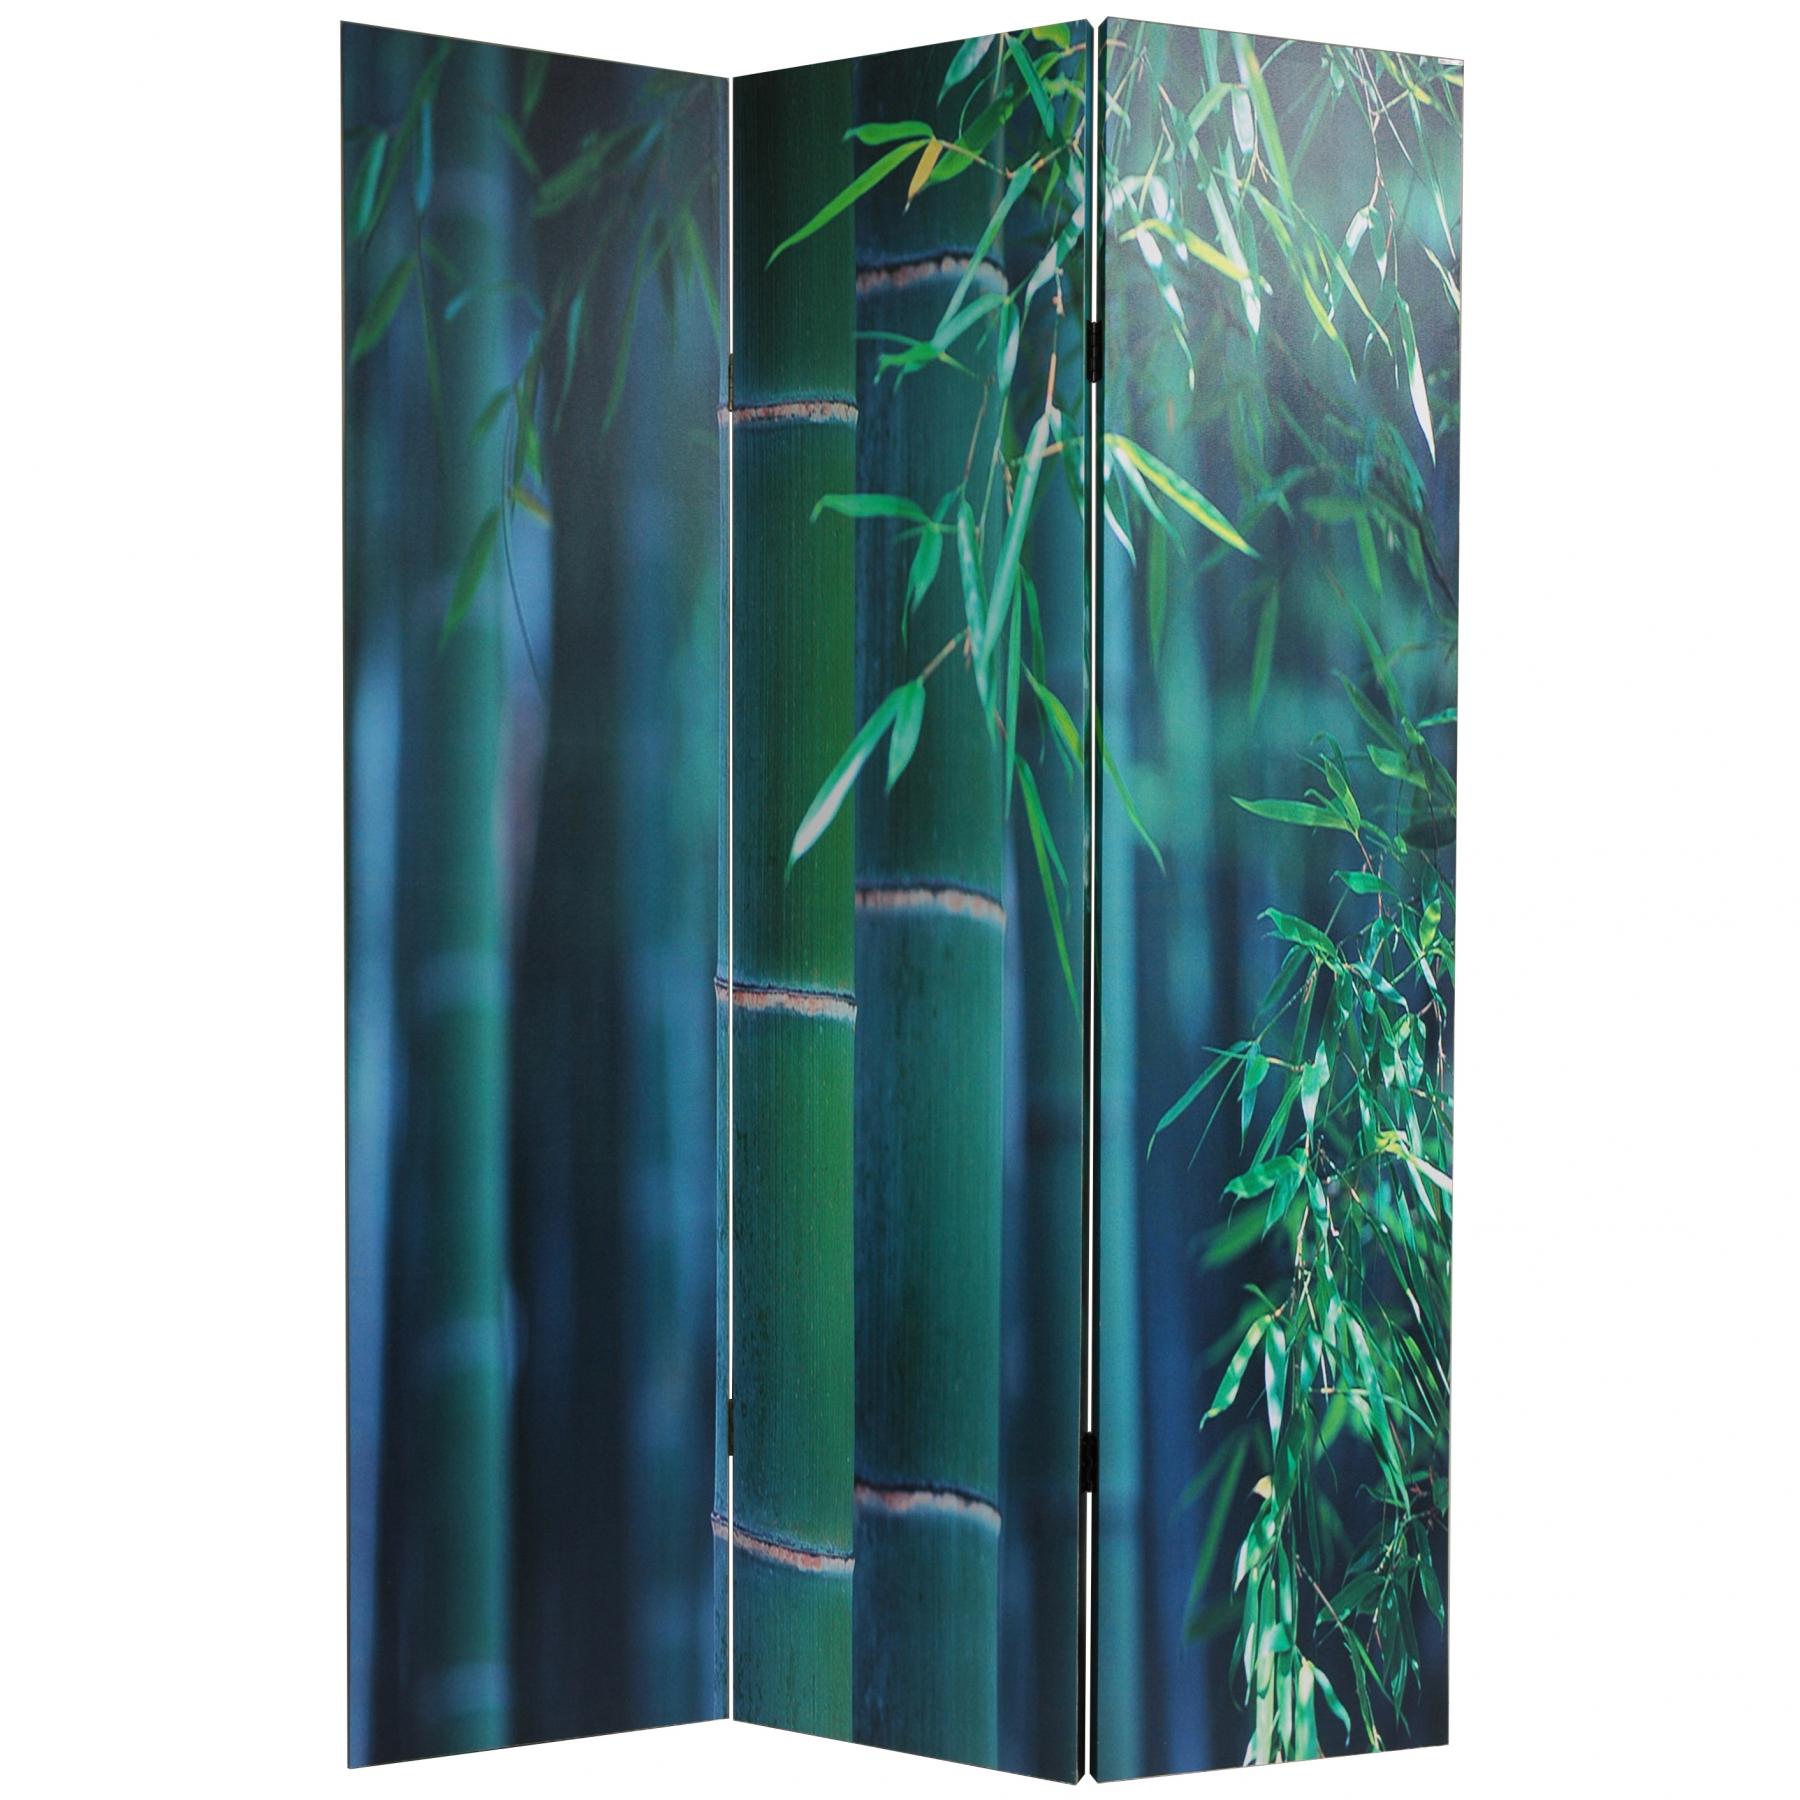 6 ft. Tall Bamboo Tree Canvas Room Divider | RoomDividers.com